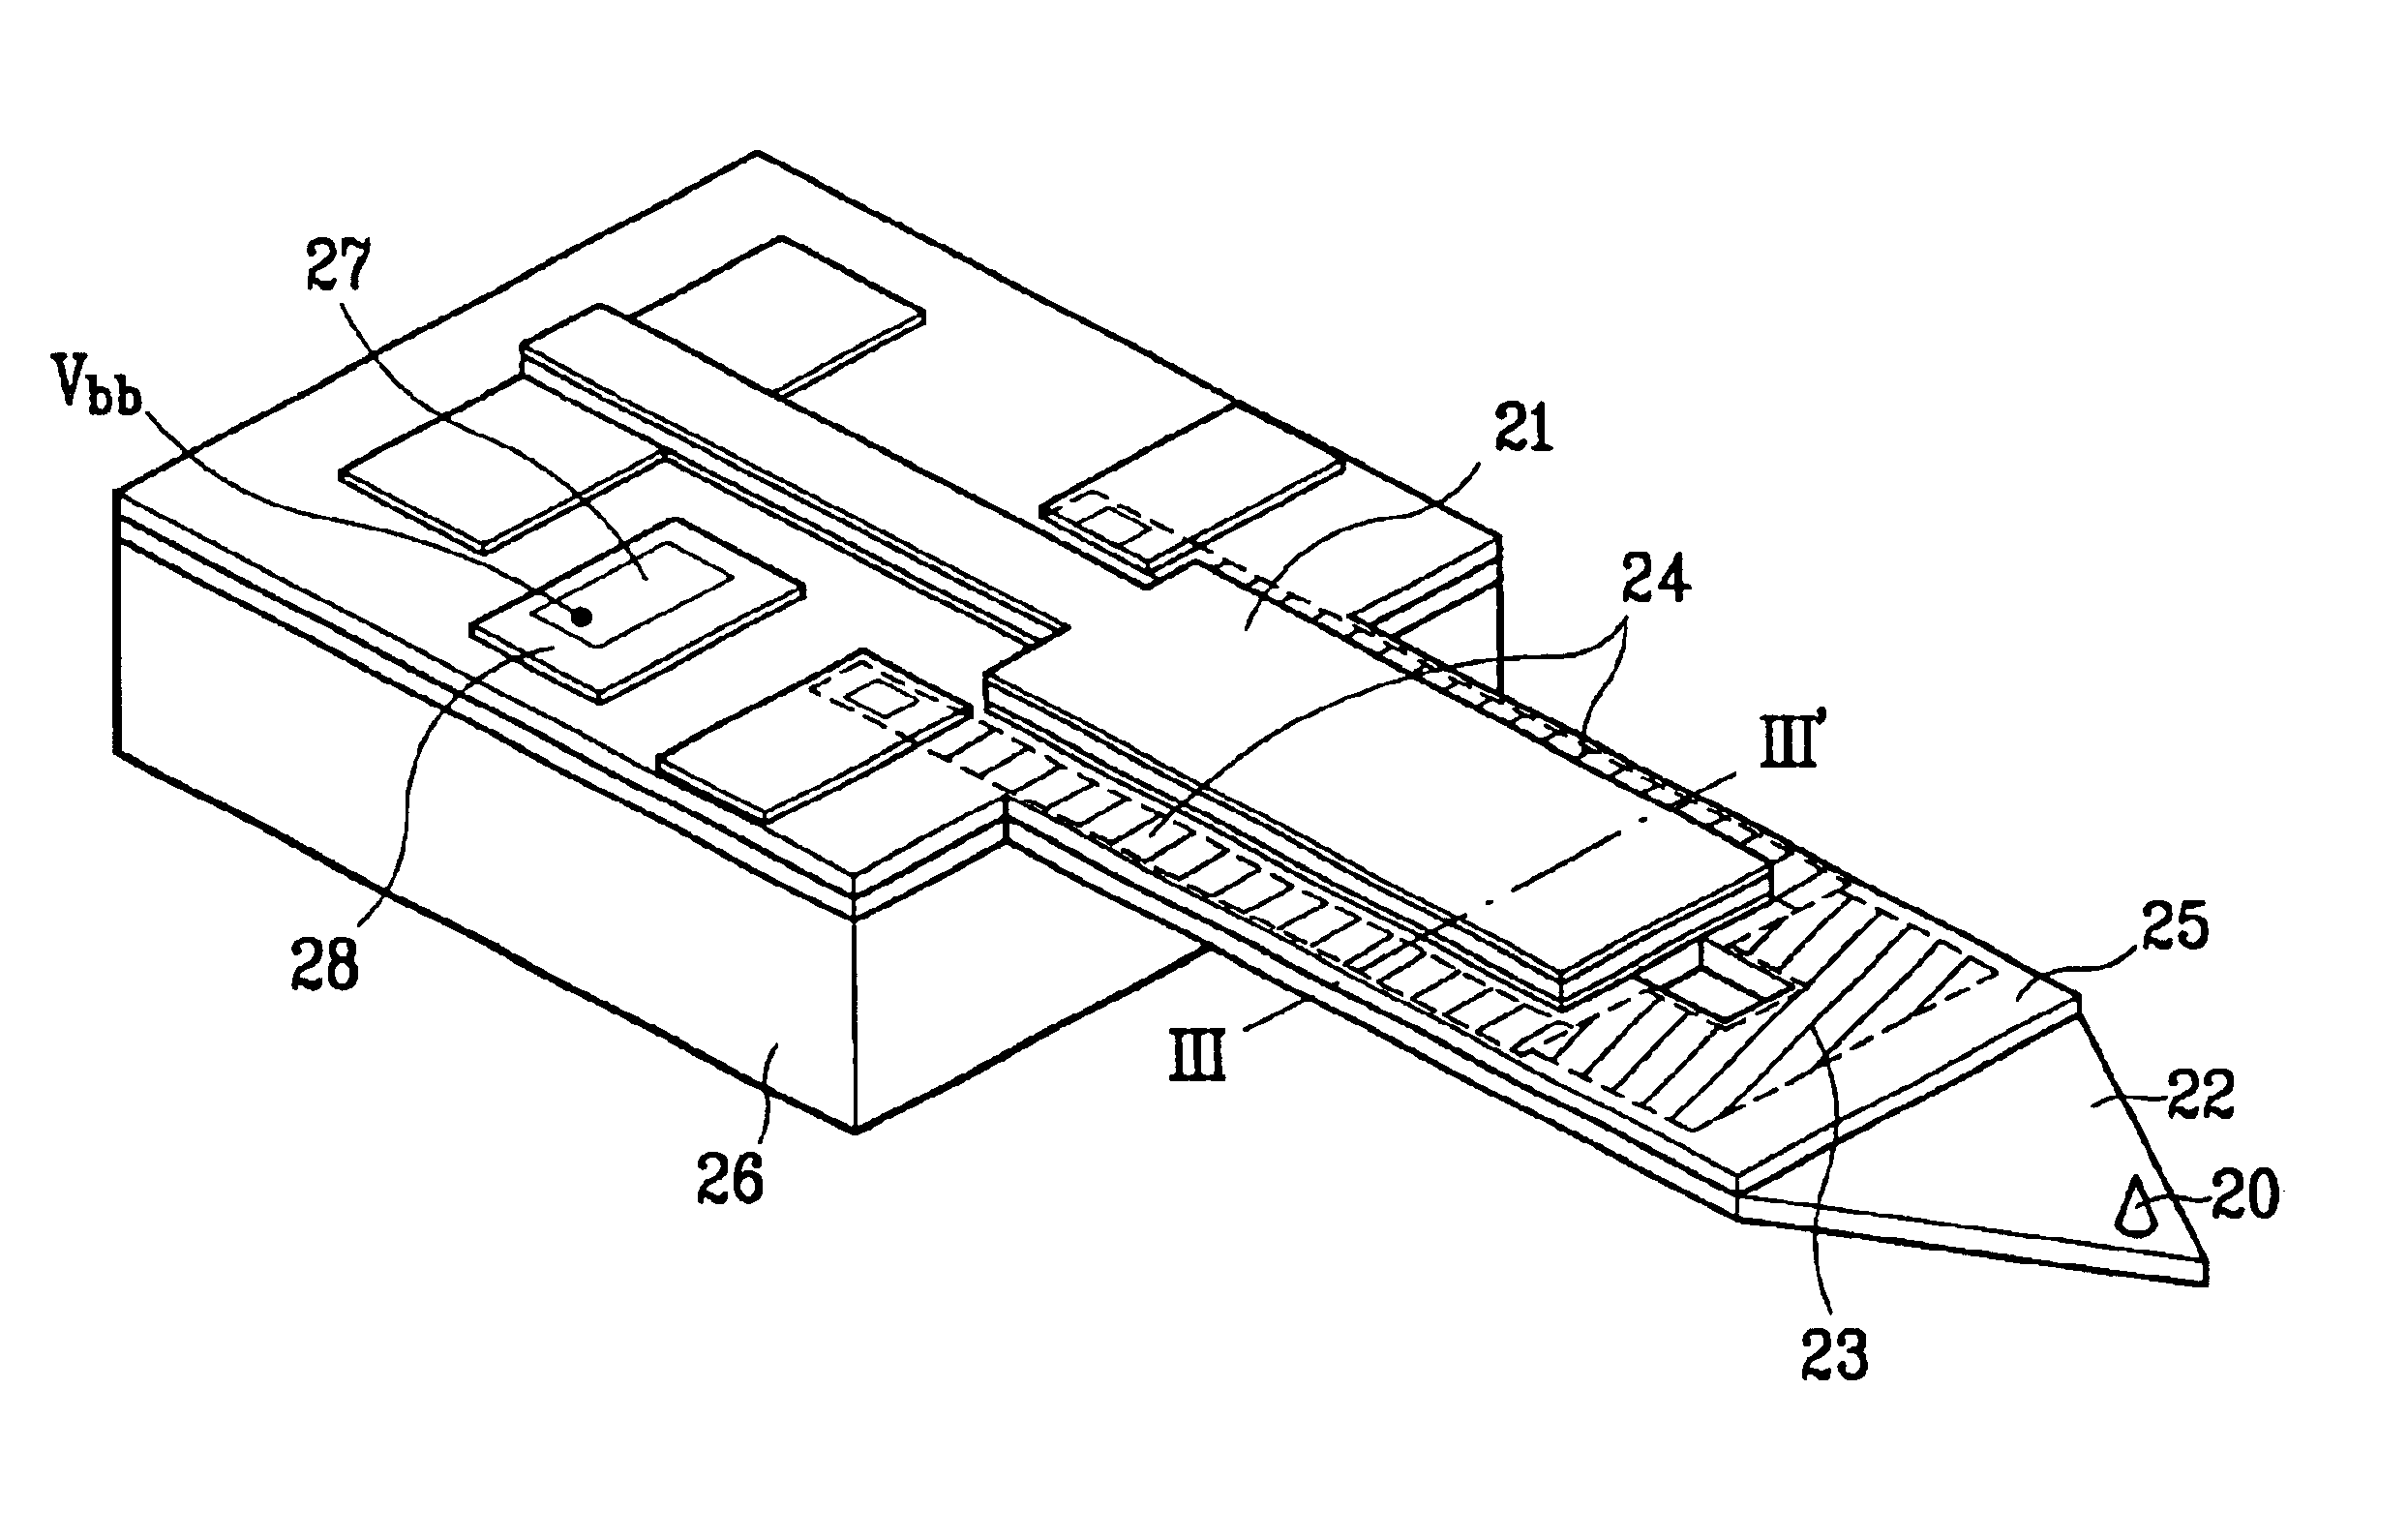 Cantilever for scanning probe microscope